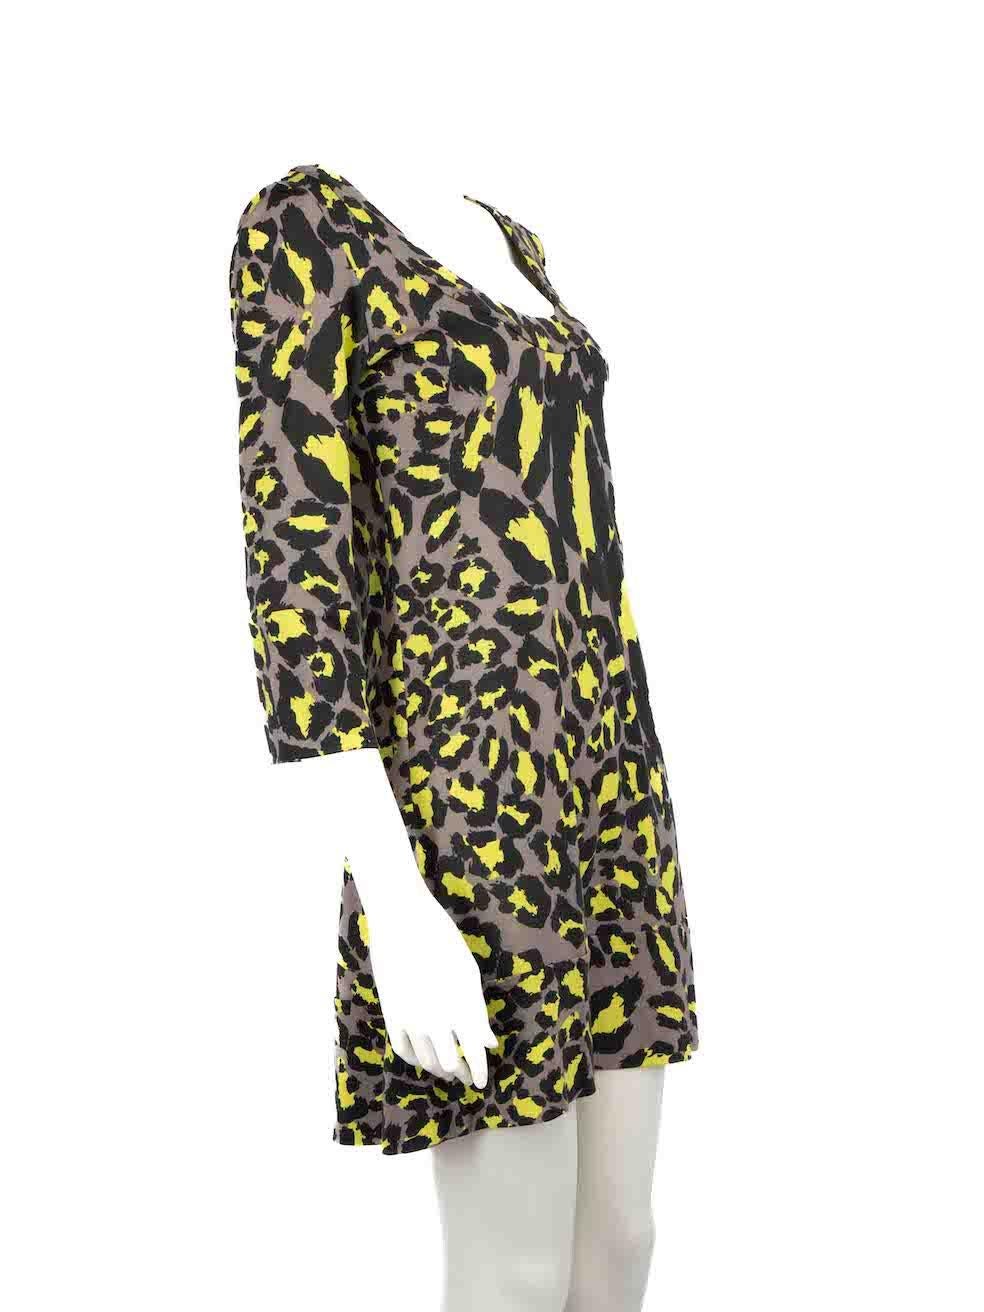 CONDITION is Very good. Hardly any visible wear to dress is evident on this used Diane Von Furstenberg Vintage designer resale item.
 
 
 
 Details
 
 
 Grey
 
 Silk
 
 Dress
 
 Leopard print
 
 Knee length
 
 Round neck
 
 Long sleeves
 
 
 
 
 
